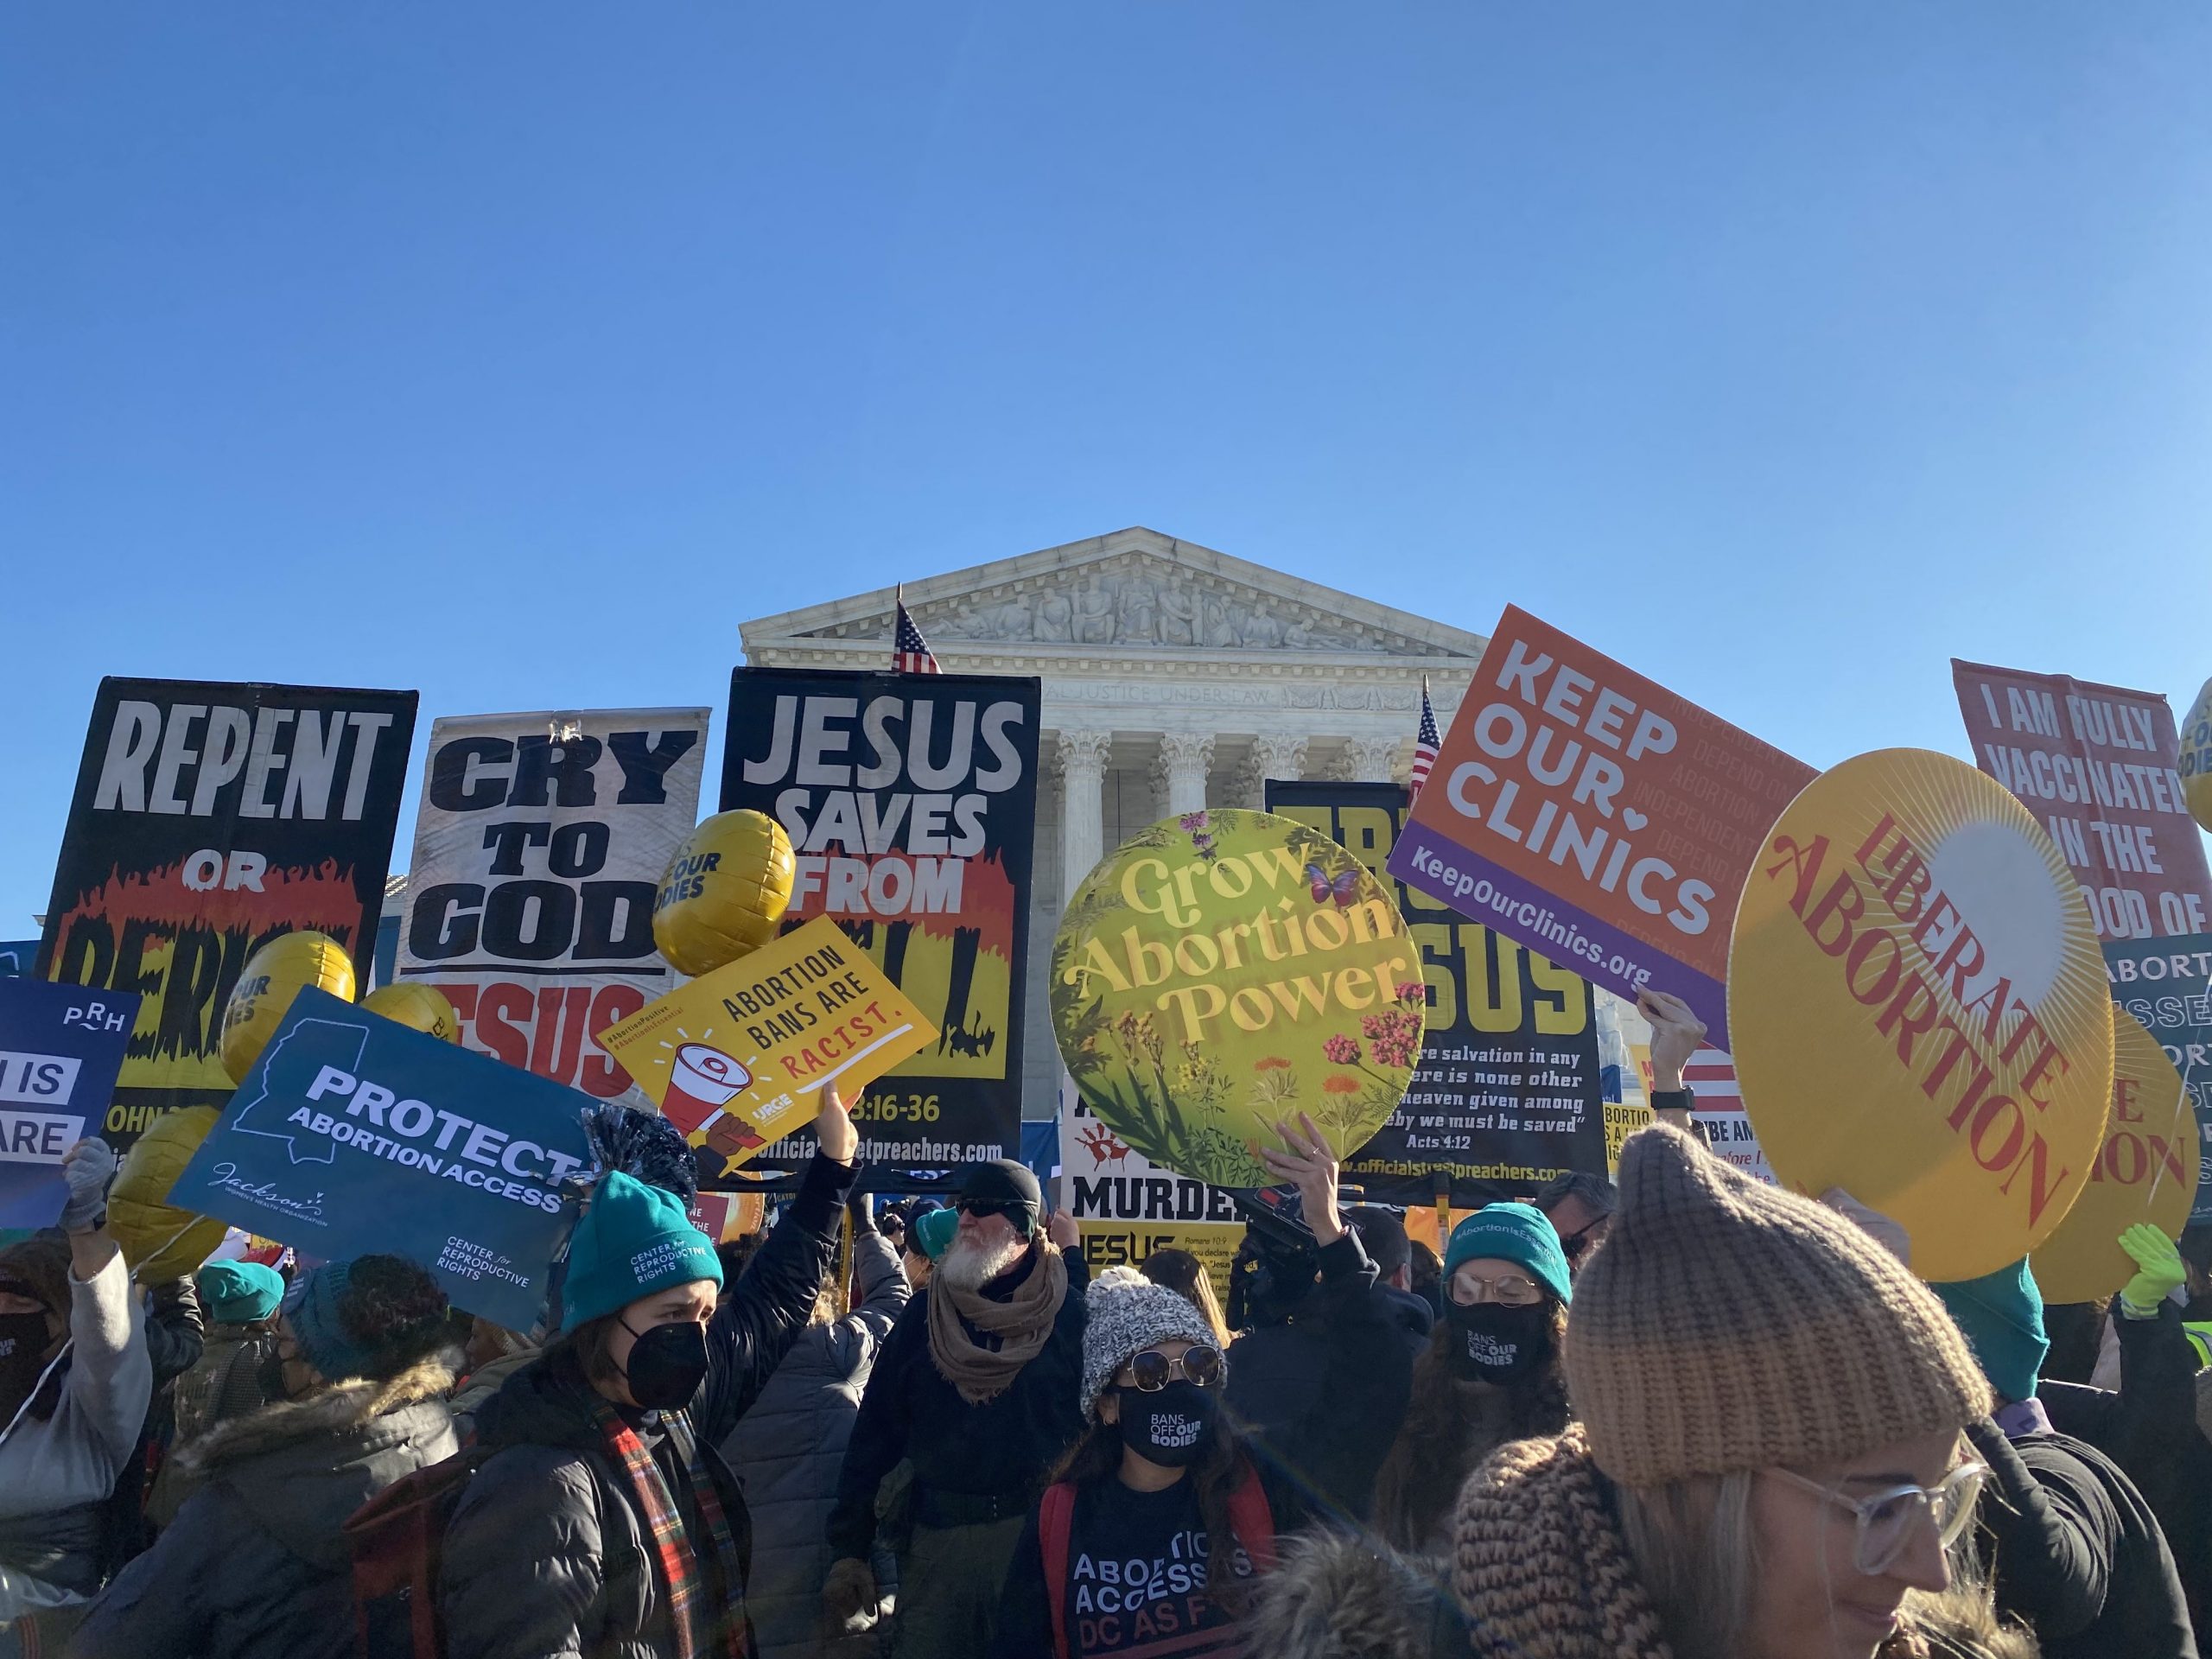 Protest signs in front of the Supreme Court